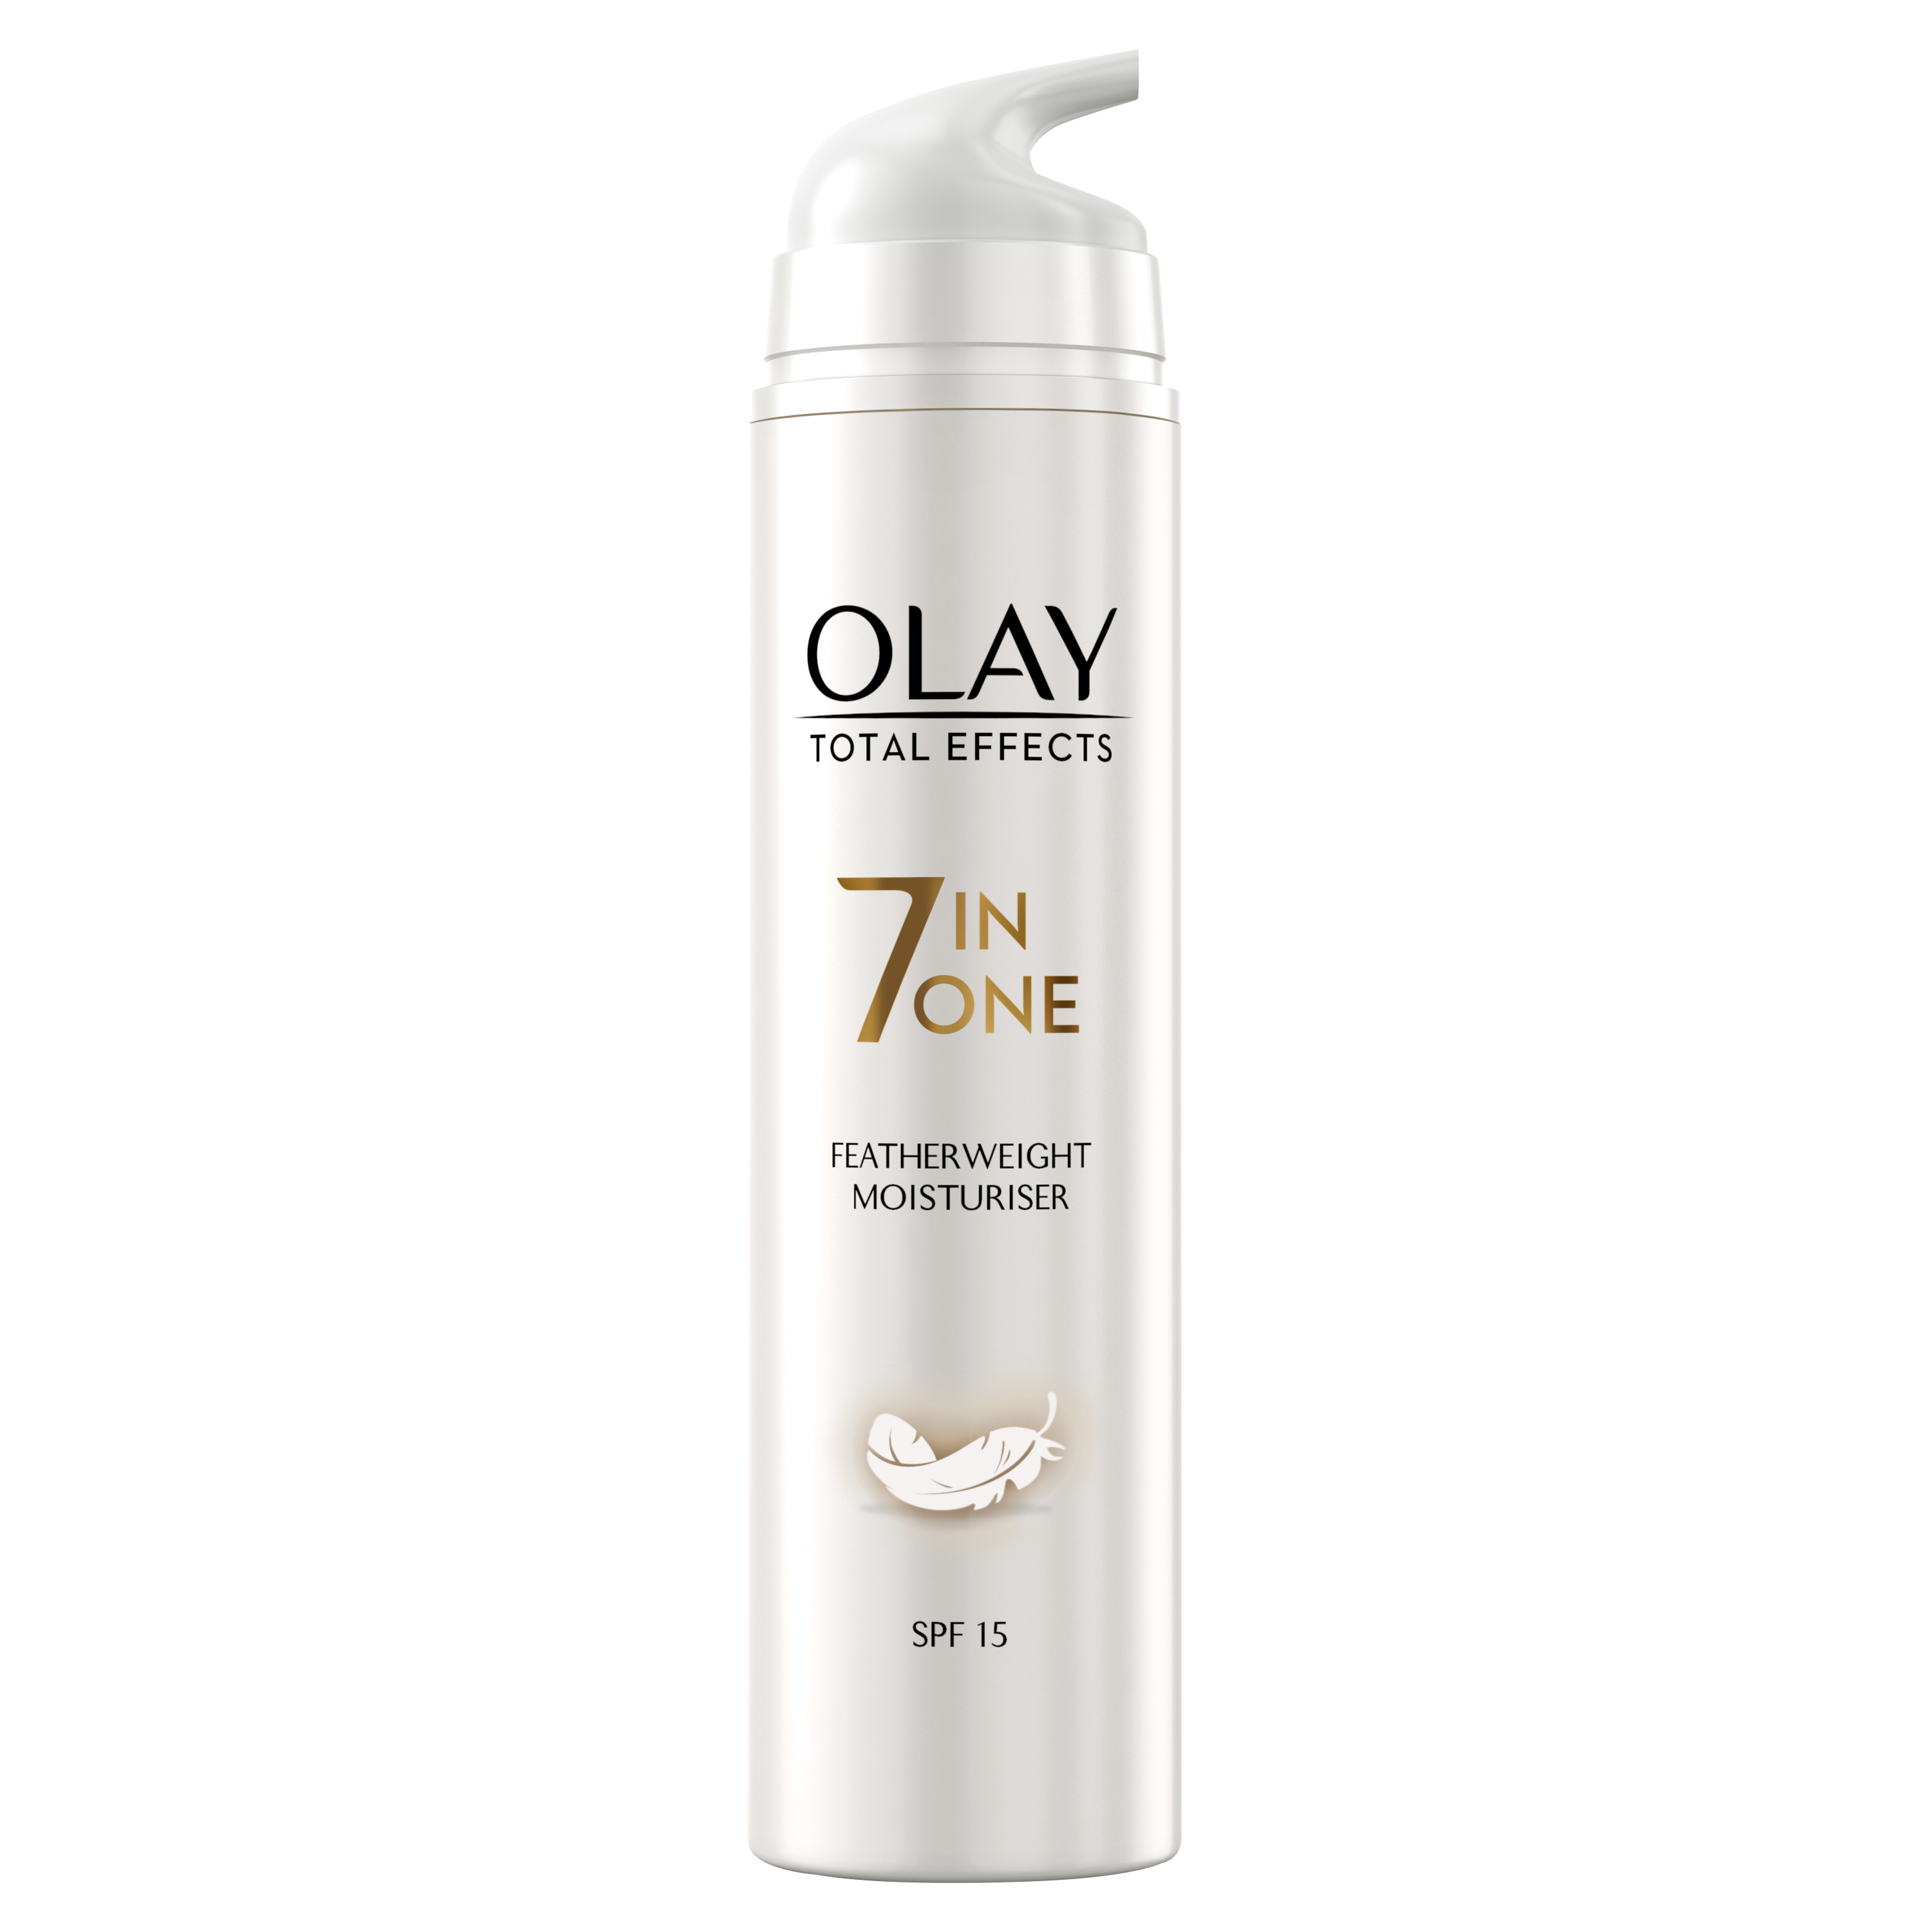 Olay Total Effects 7in1 Anti-Ageing Featherweight Moisturiser SPF 15 50ml  - SI1